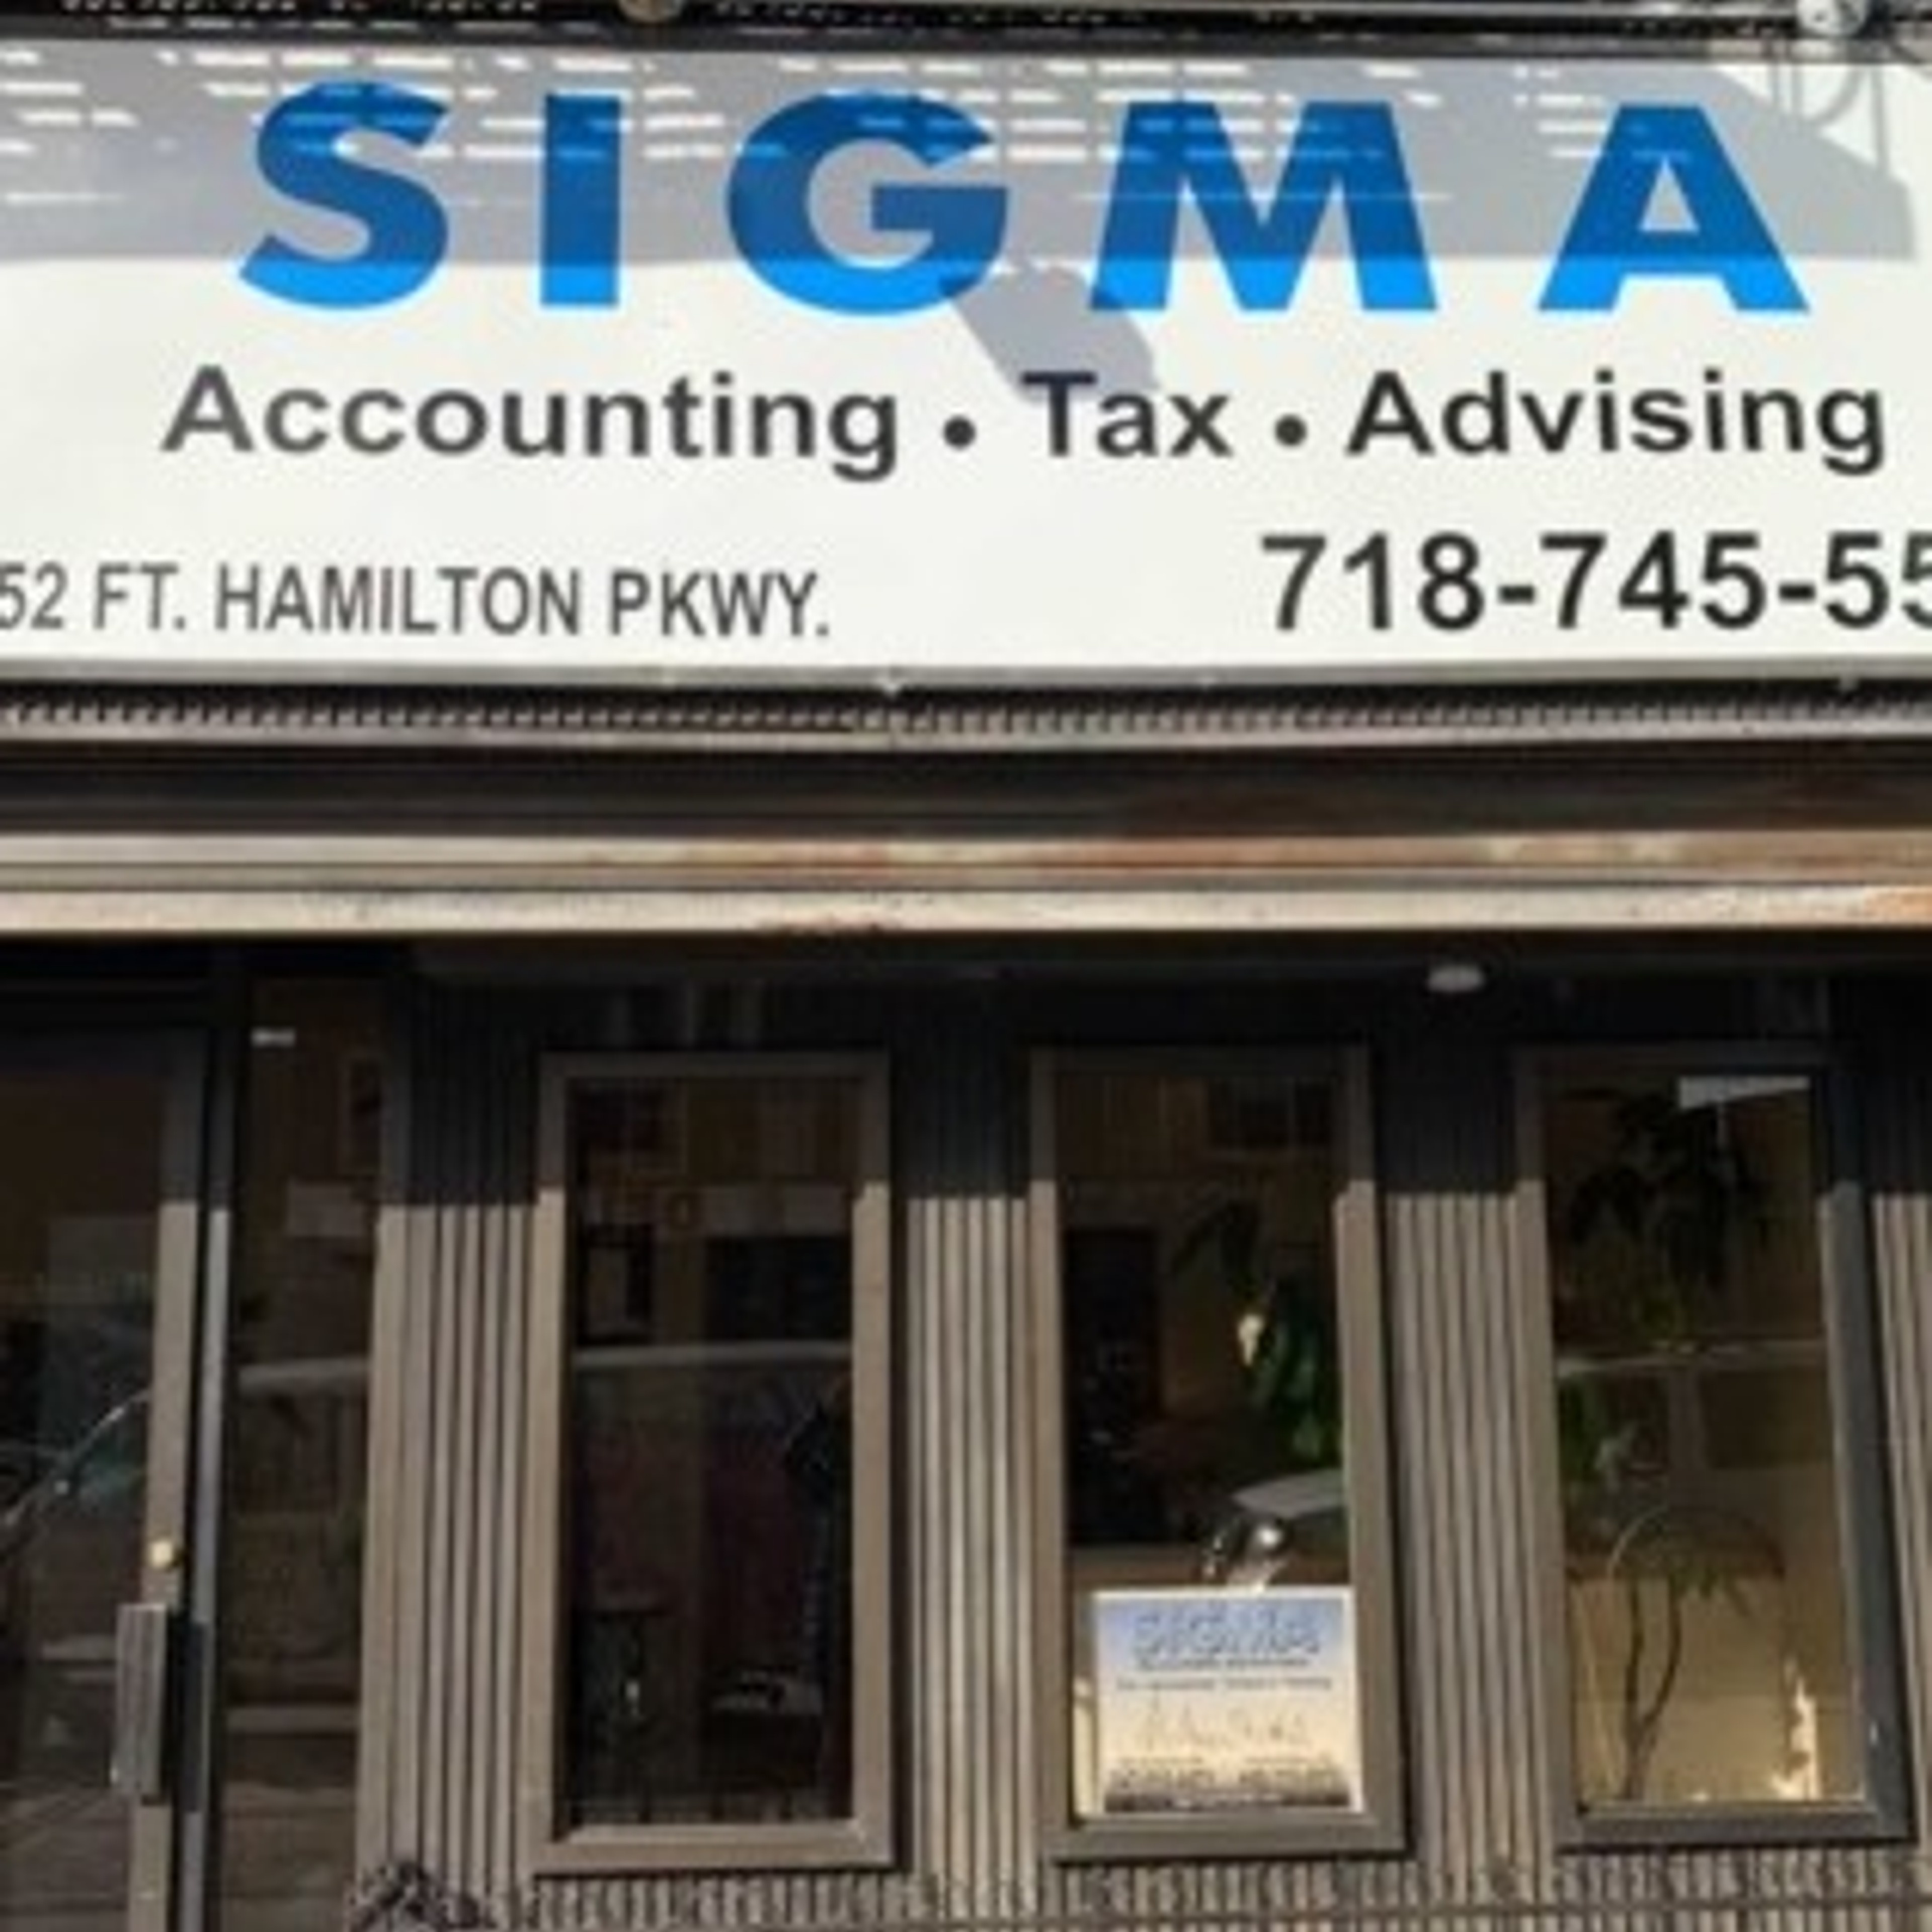 Sigma Accountants and Advisors provides tax, accounting and advisory services